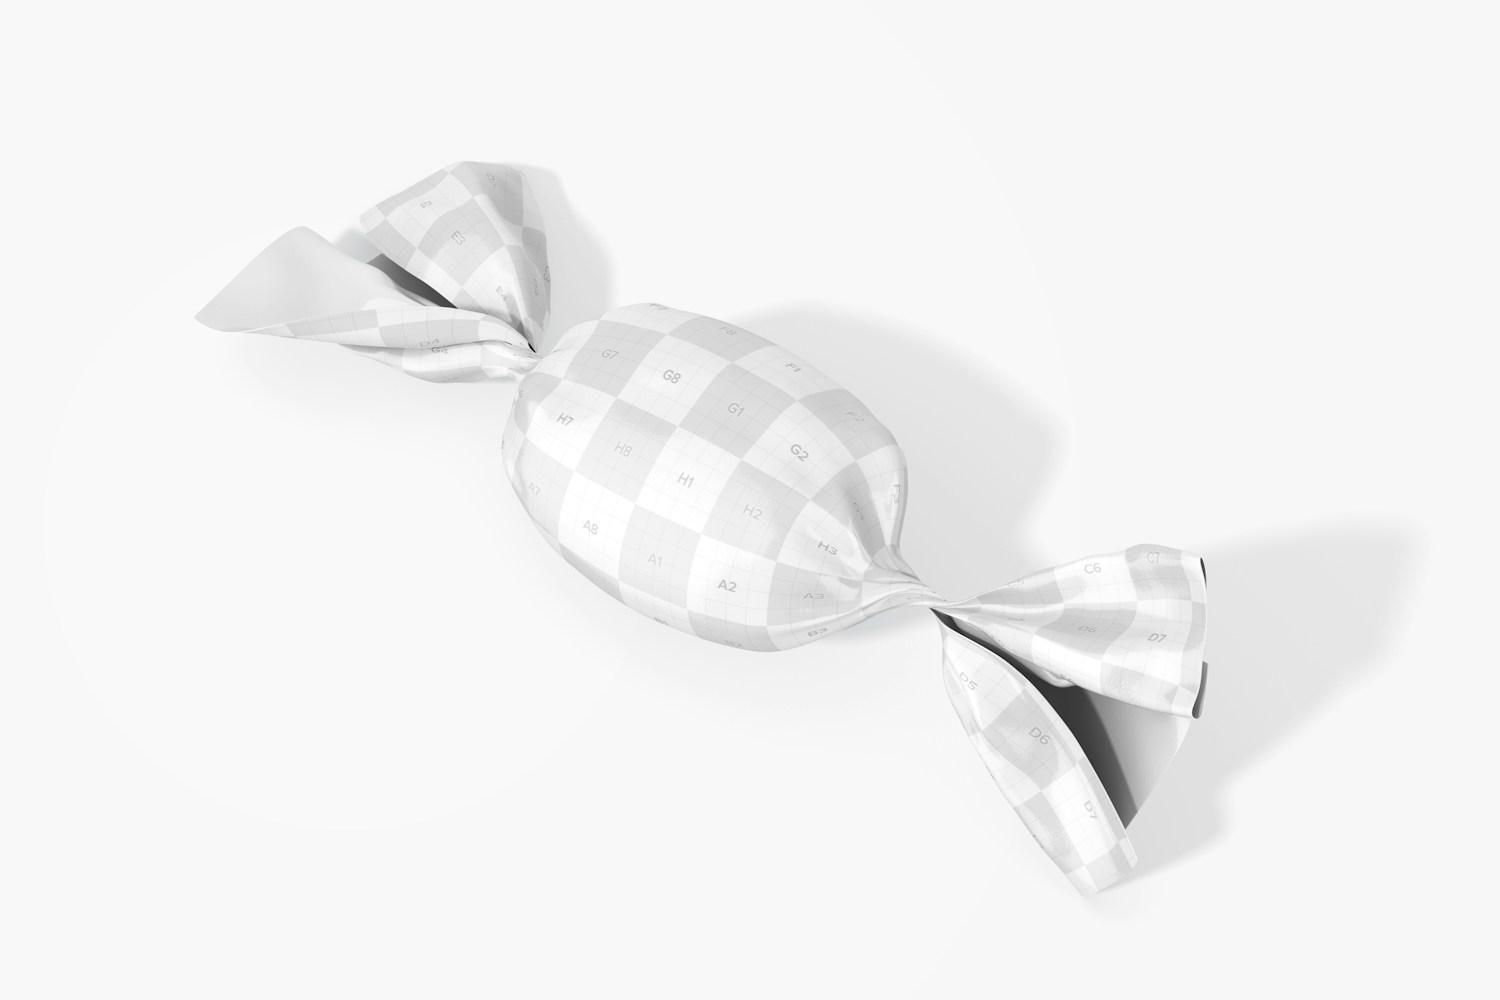 Candy Wrapper Mockup, Perspective